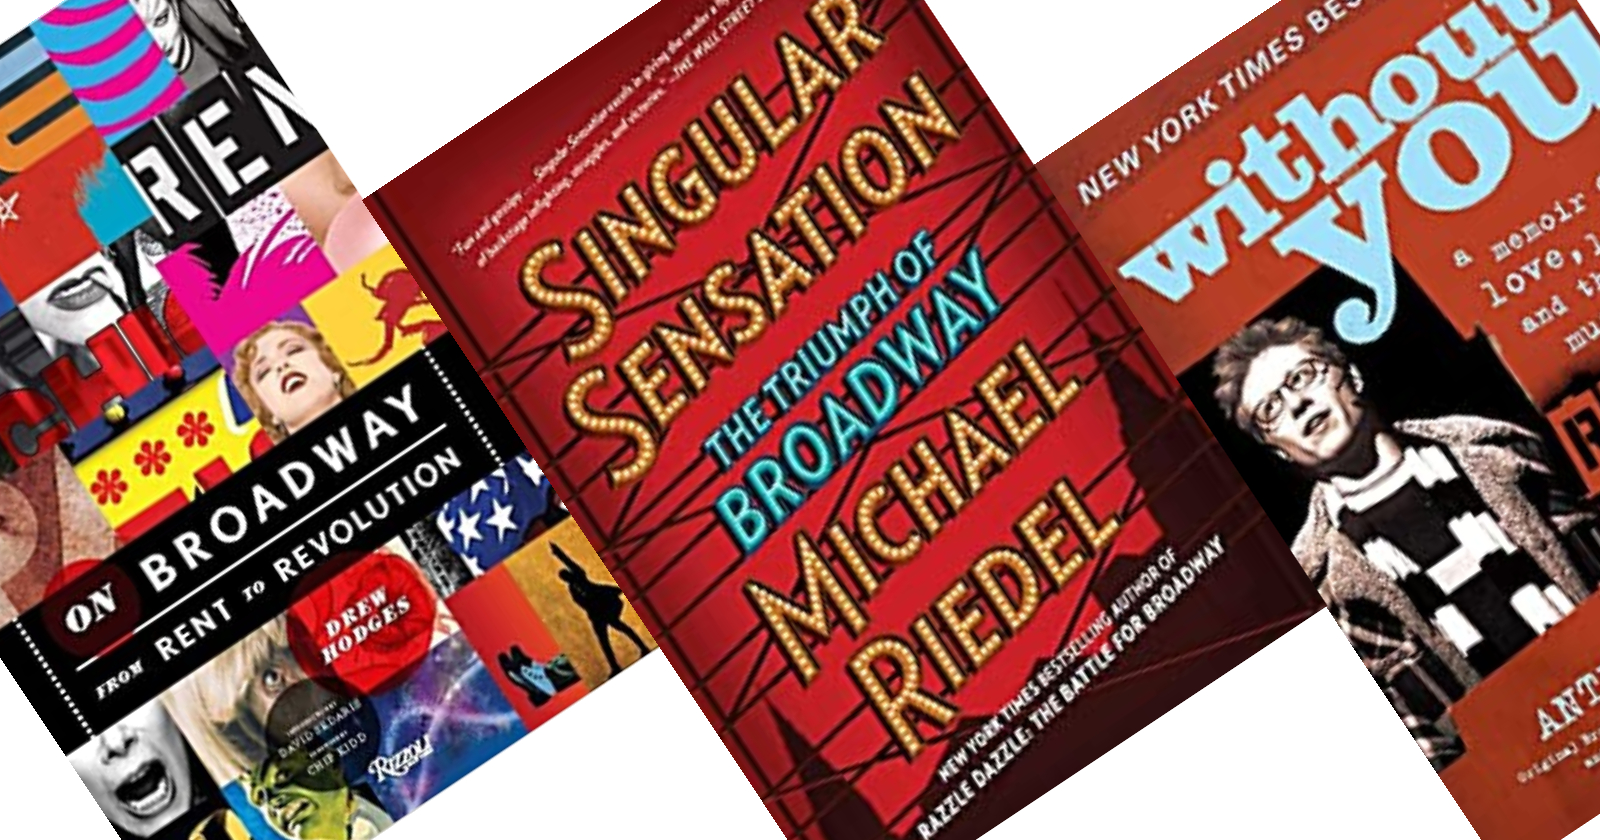 3 tilted book covers with Singular Sensation in the center